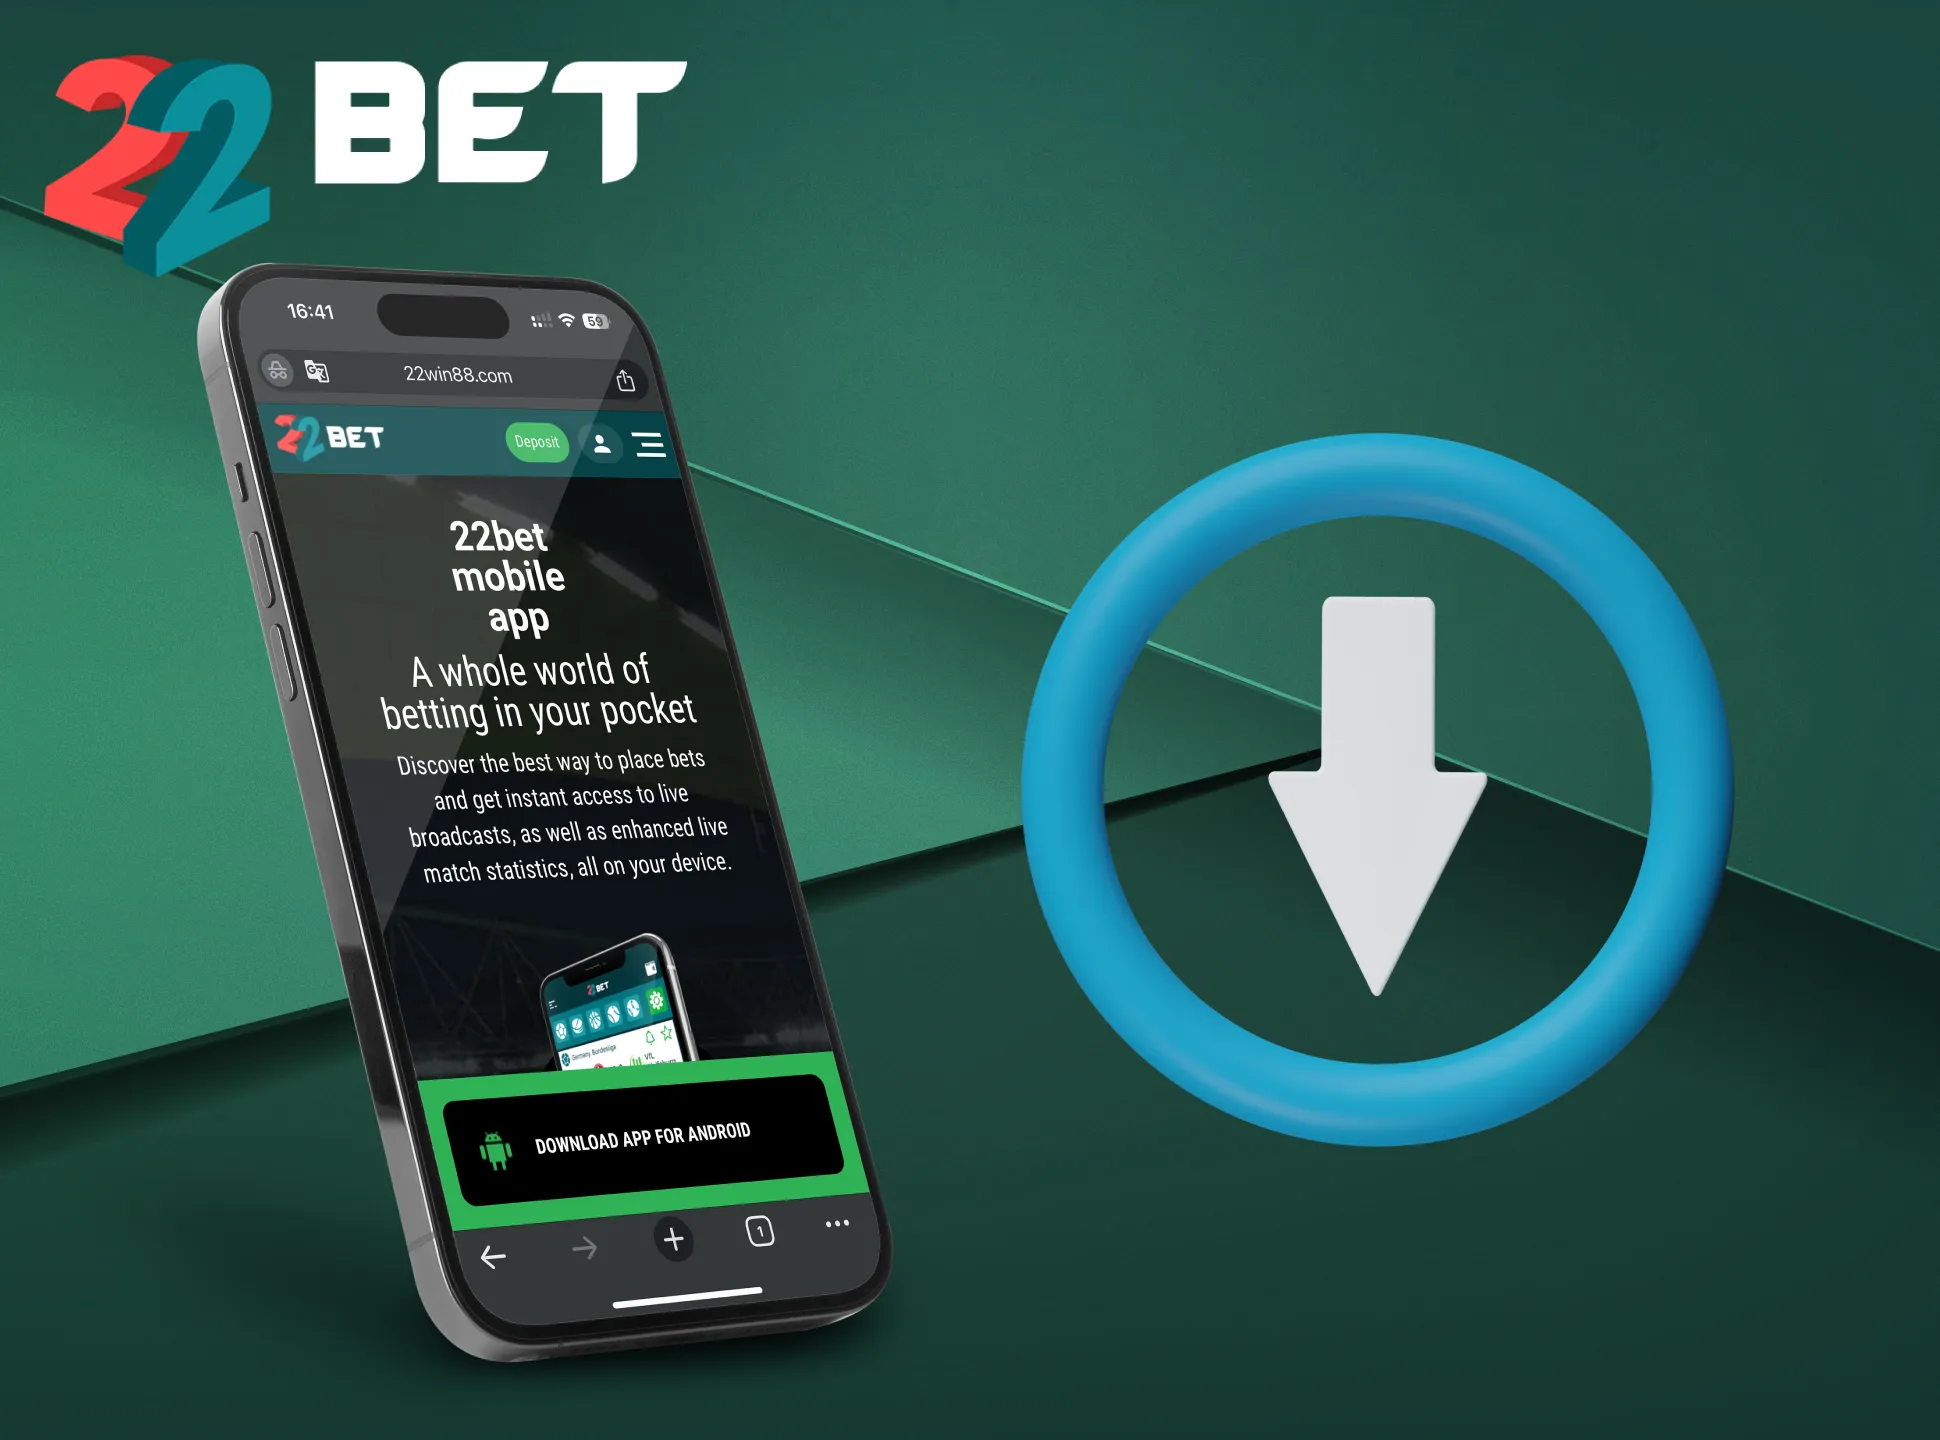 To get the bonuses install the 22Bet app on your phone.